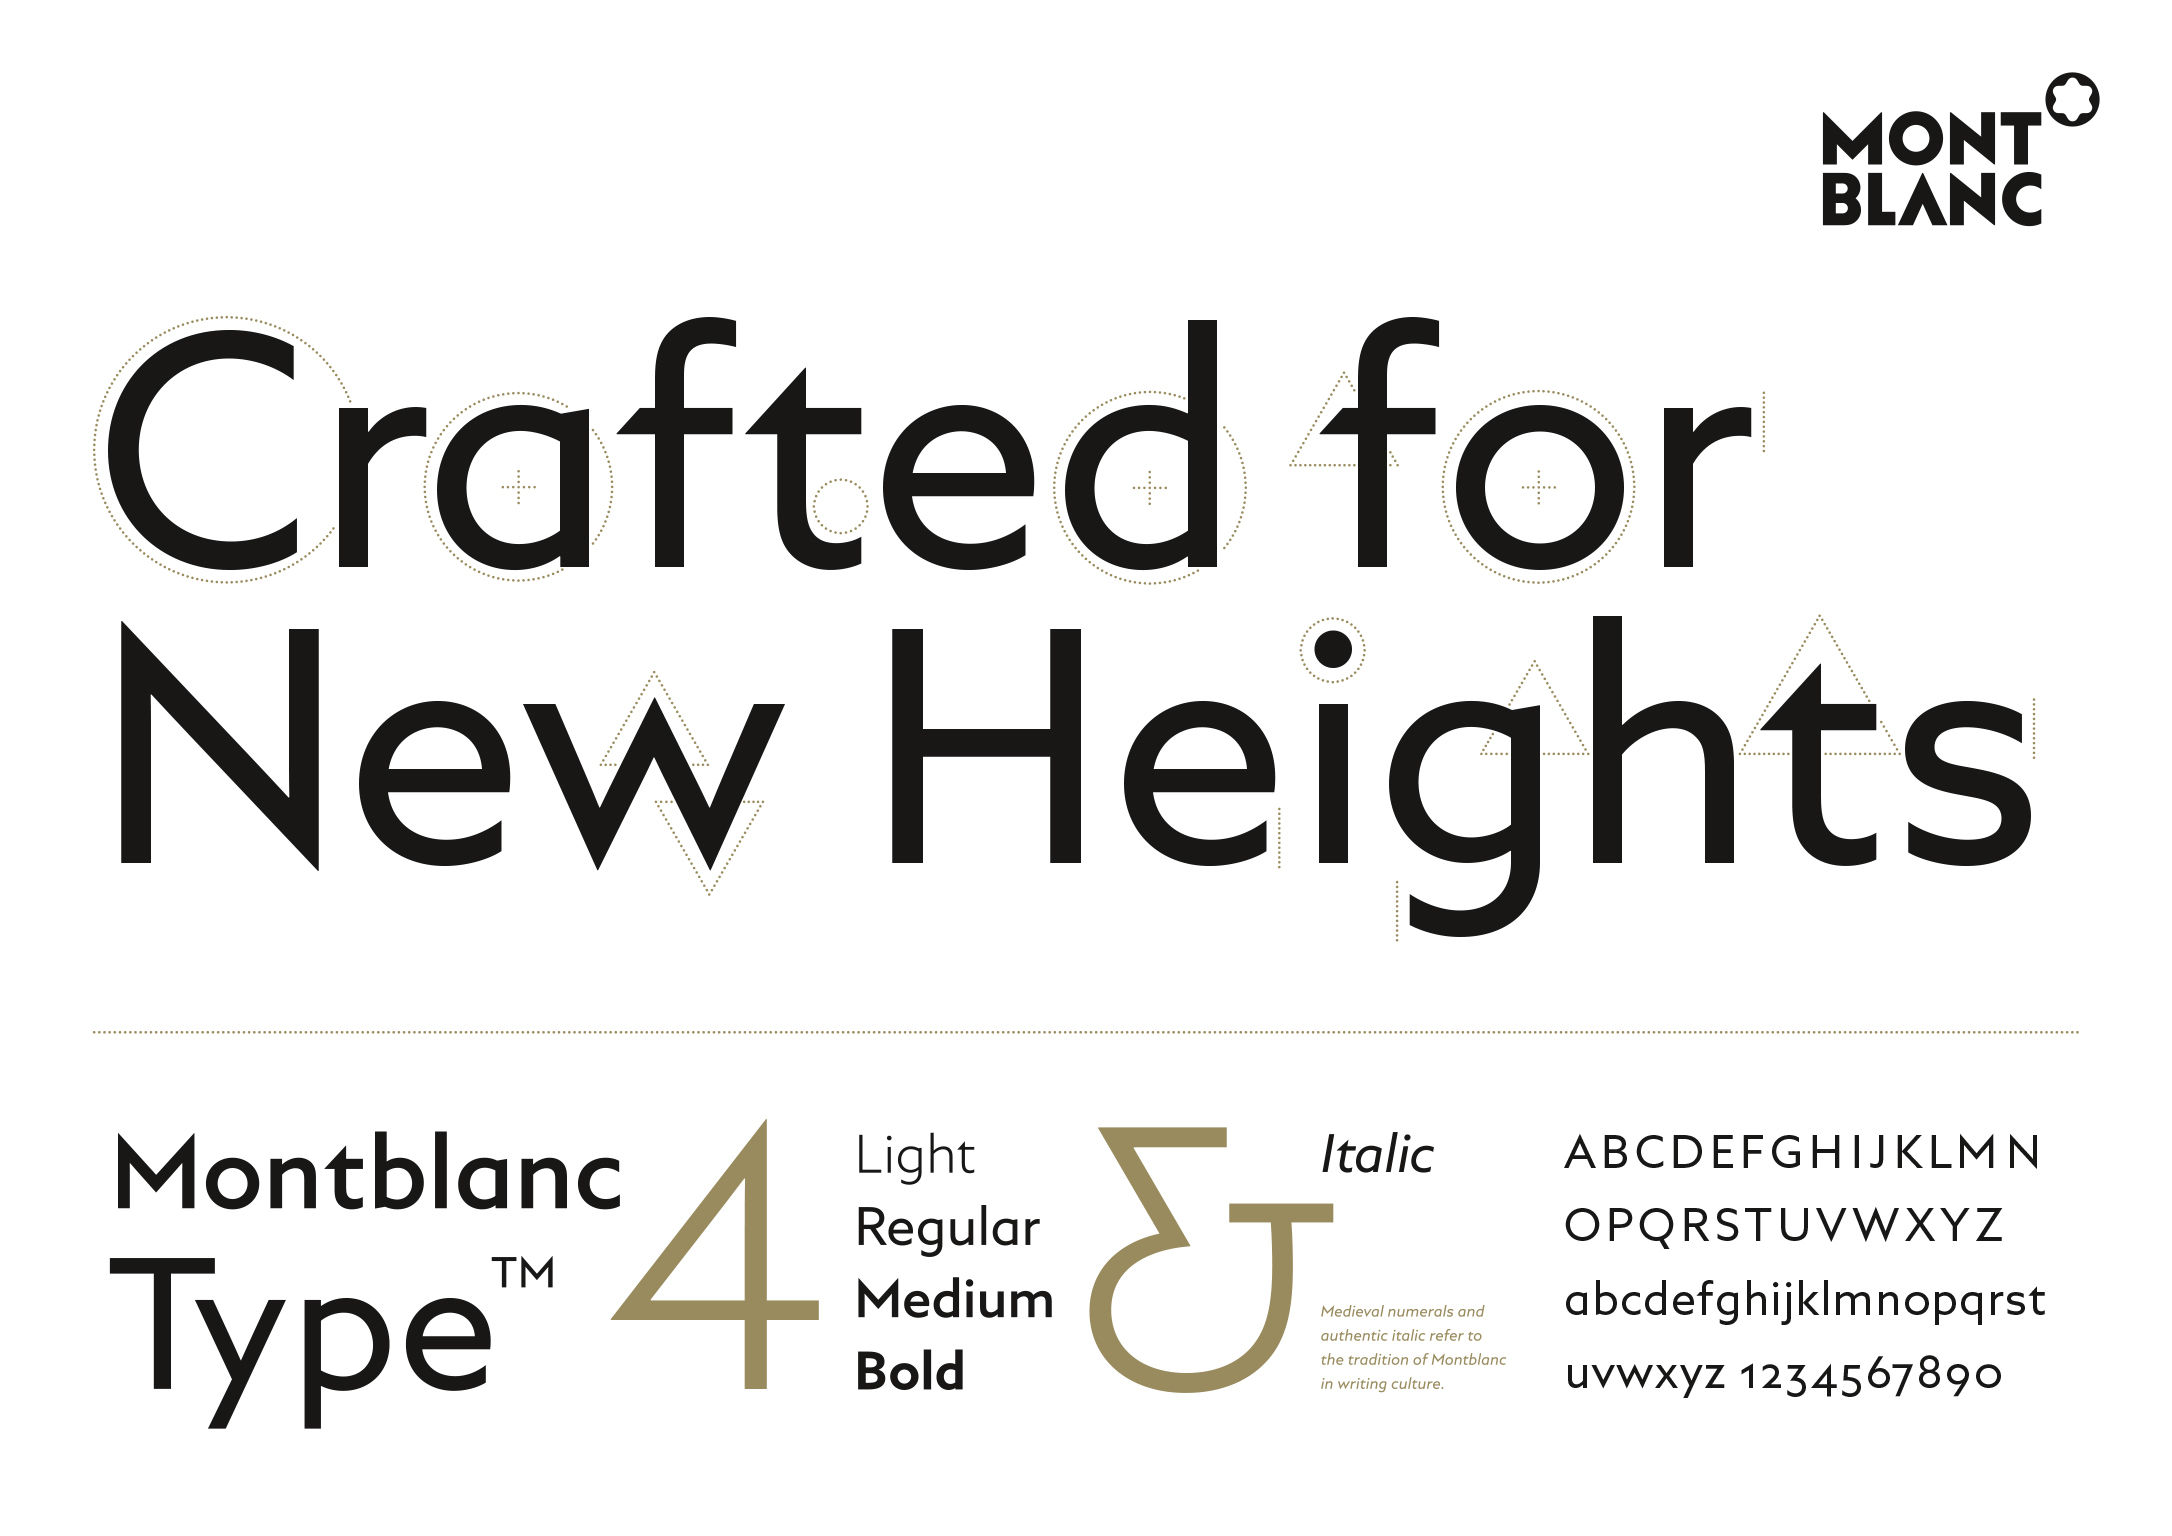 Montblanc: Redesign of a traditional trademark and a corporate